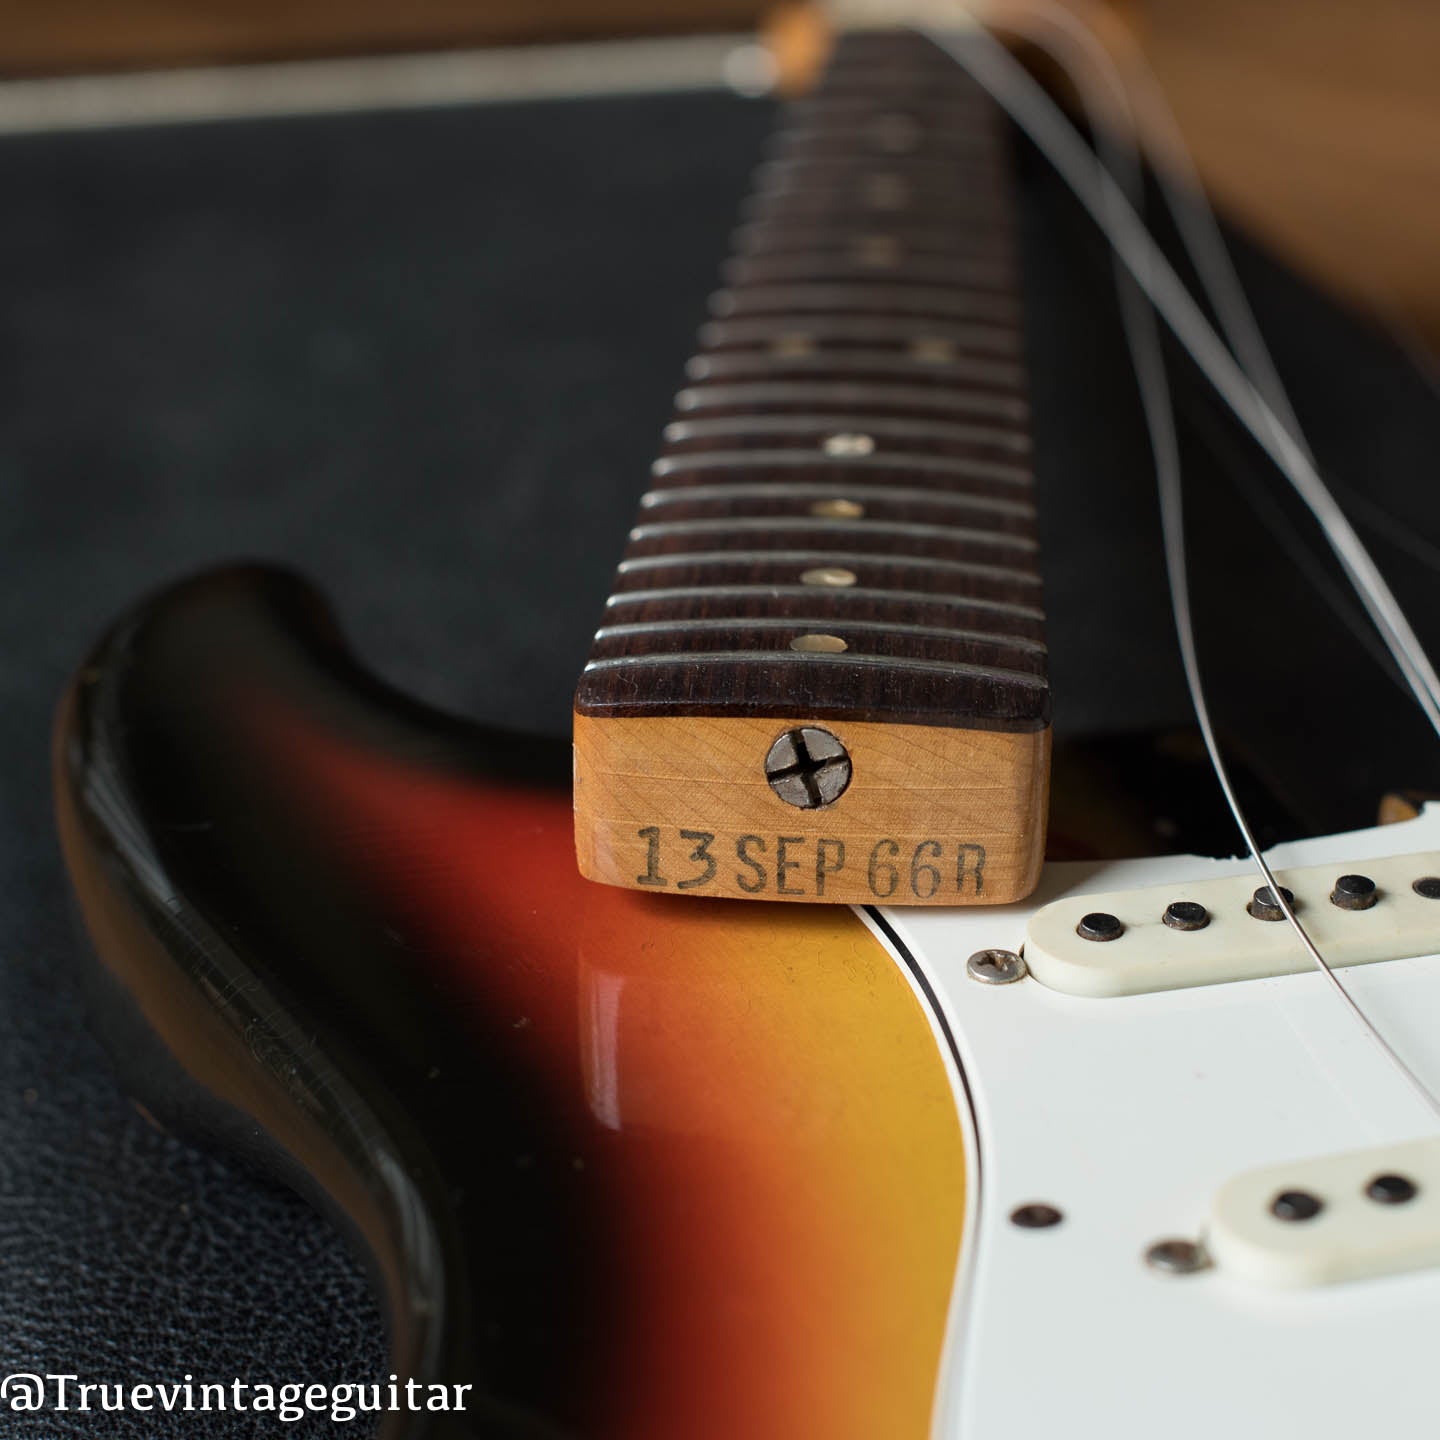 How to find the year of a Fender Stratocaster 1960s